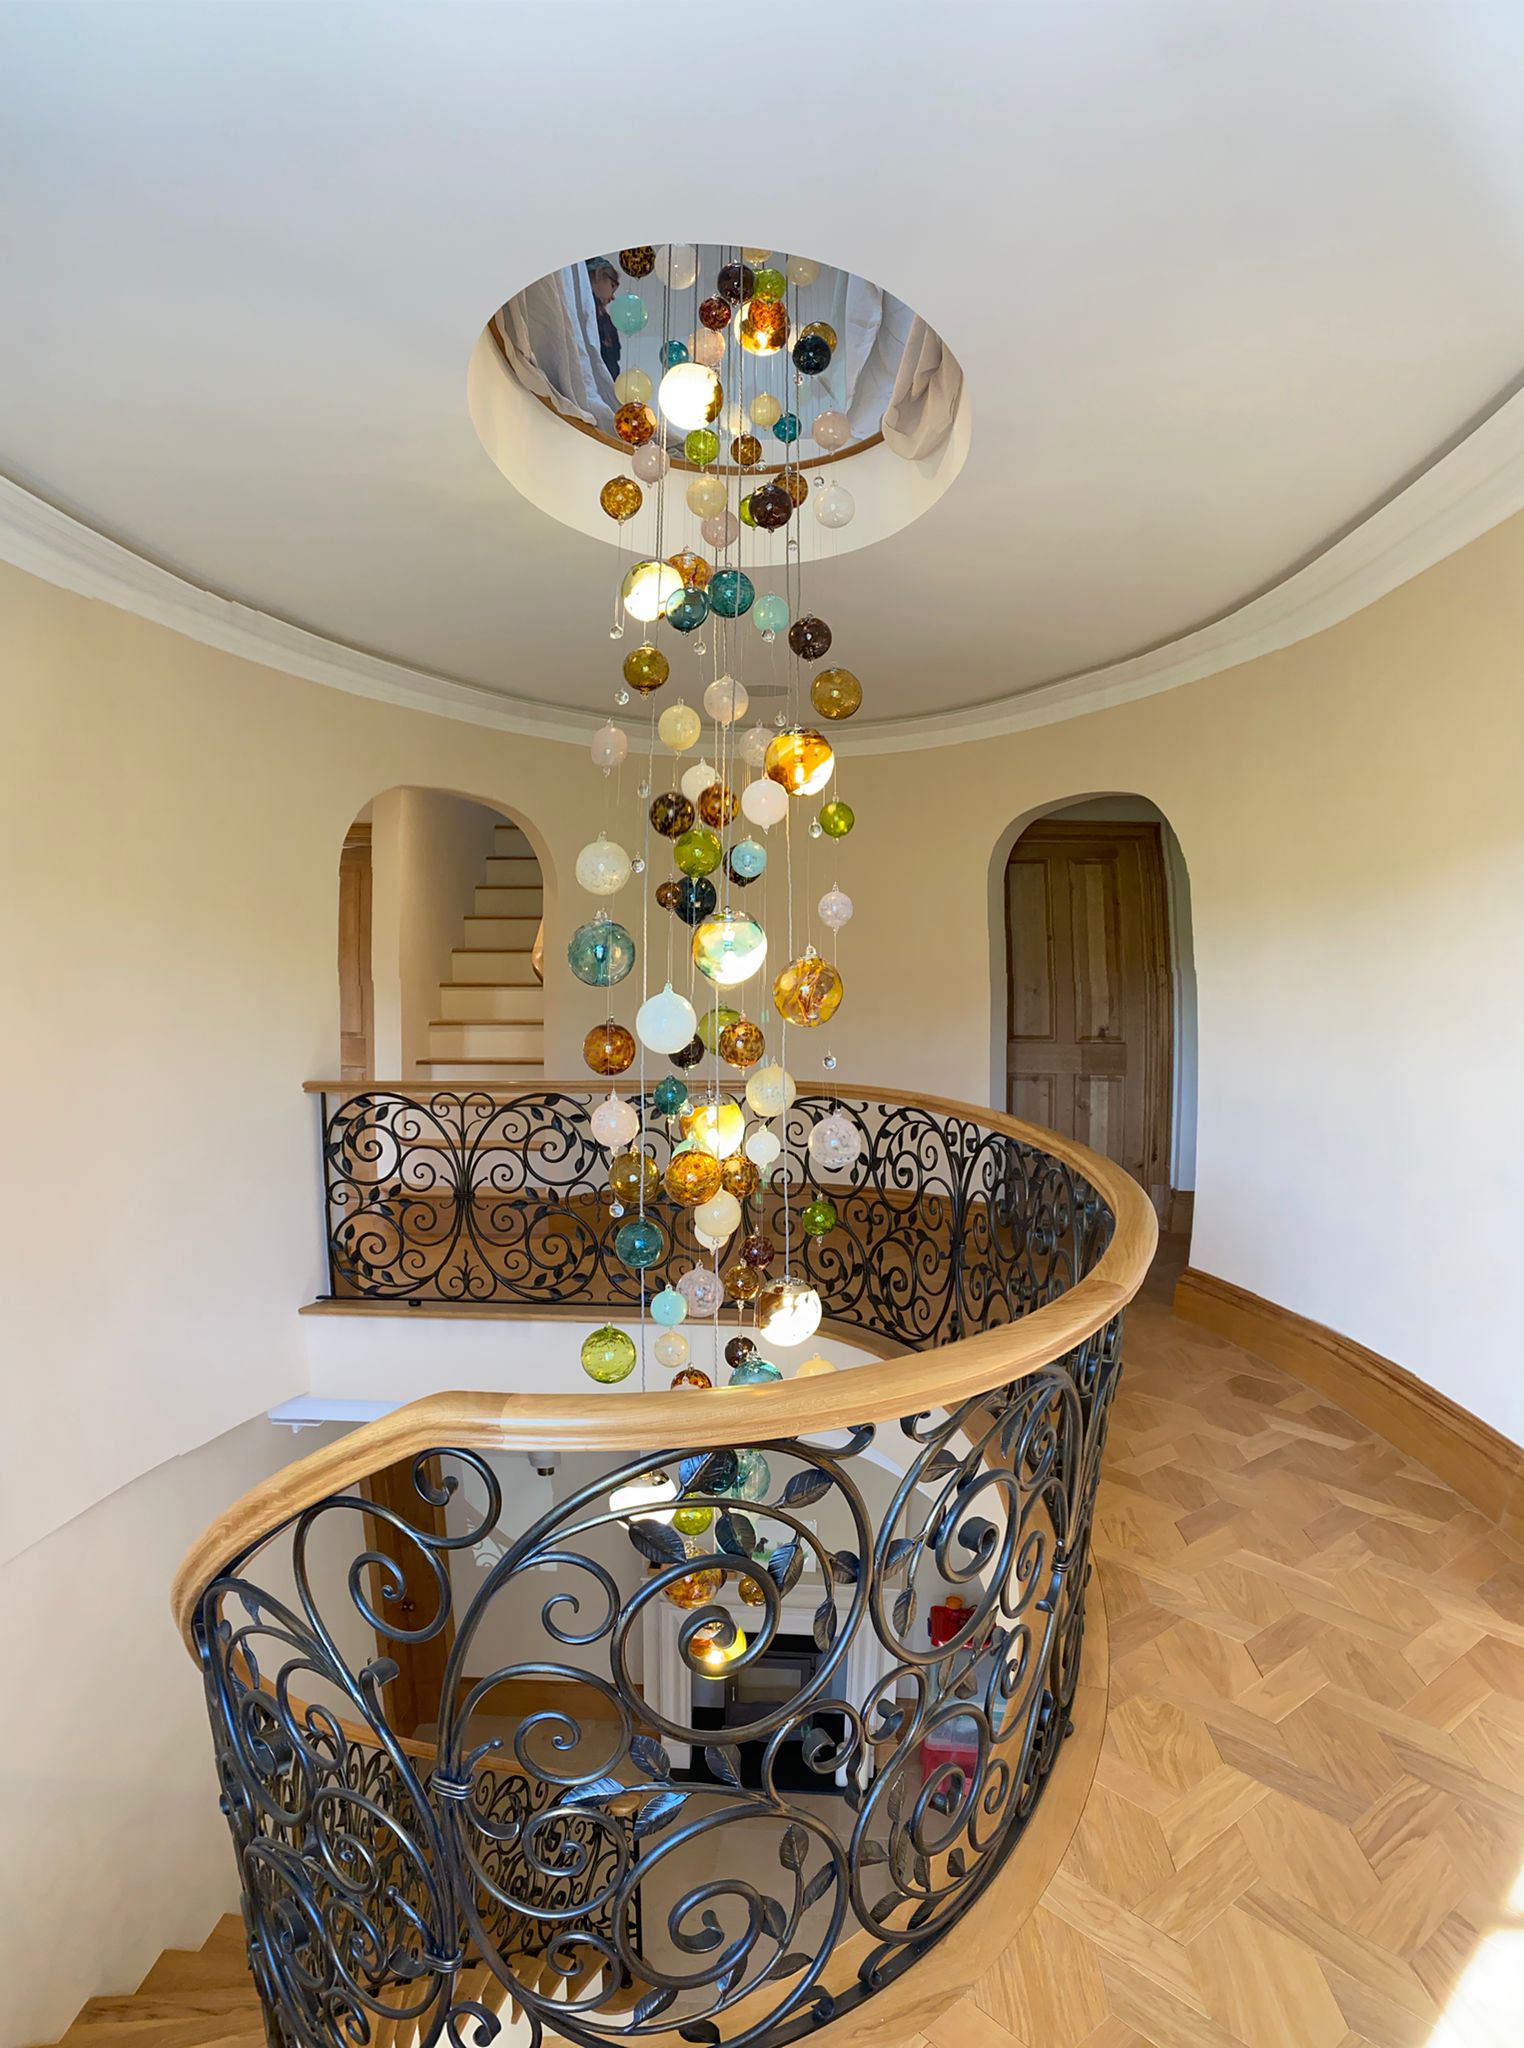 This contemporary chandelier is an Cascade design and features over 150 individually blown glass spheres. The glass is blown in Europe and the UK and the chandelier is designed and handcrafted in our studio in South London. 

This chandelier is